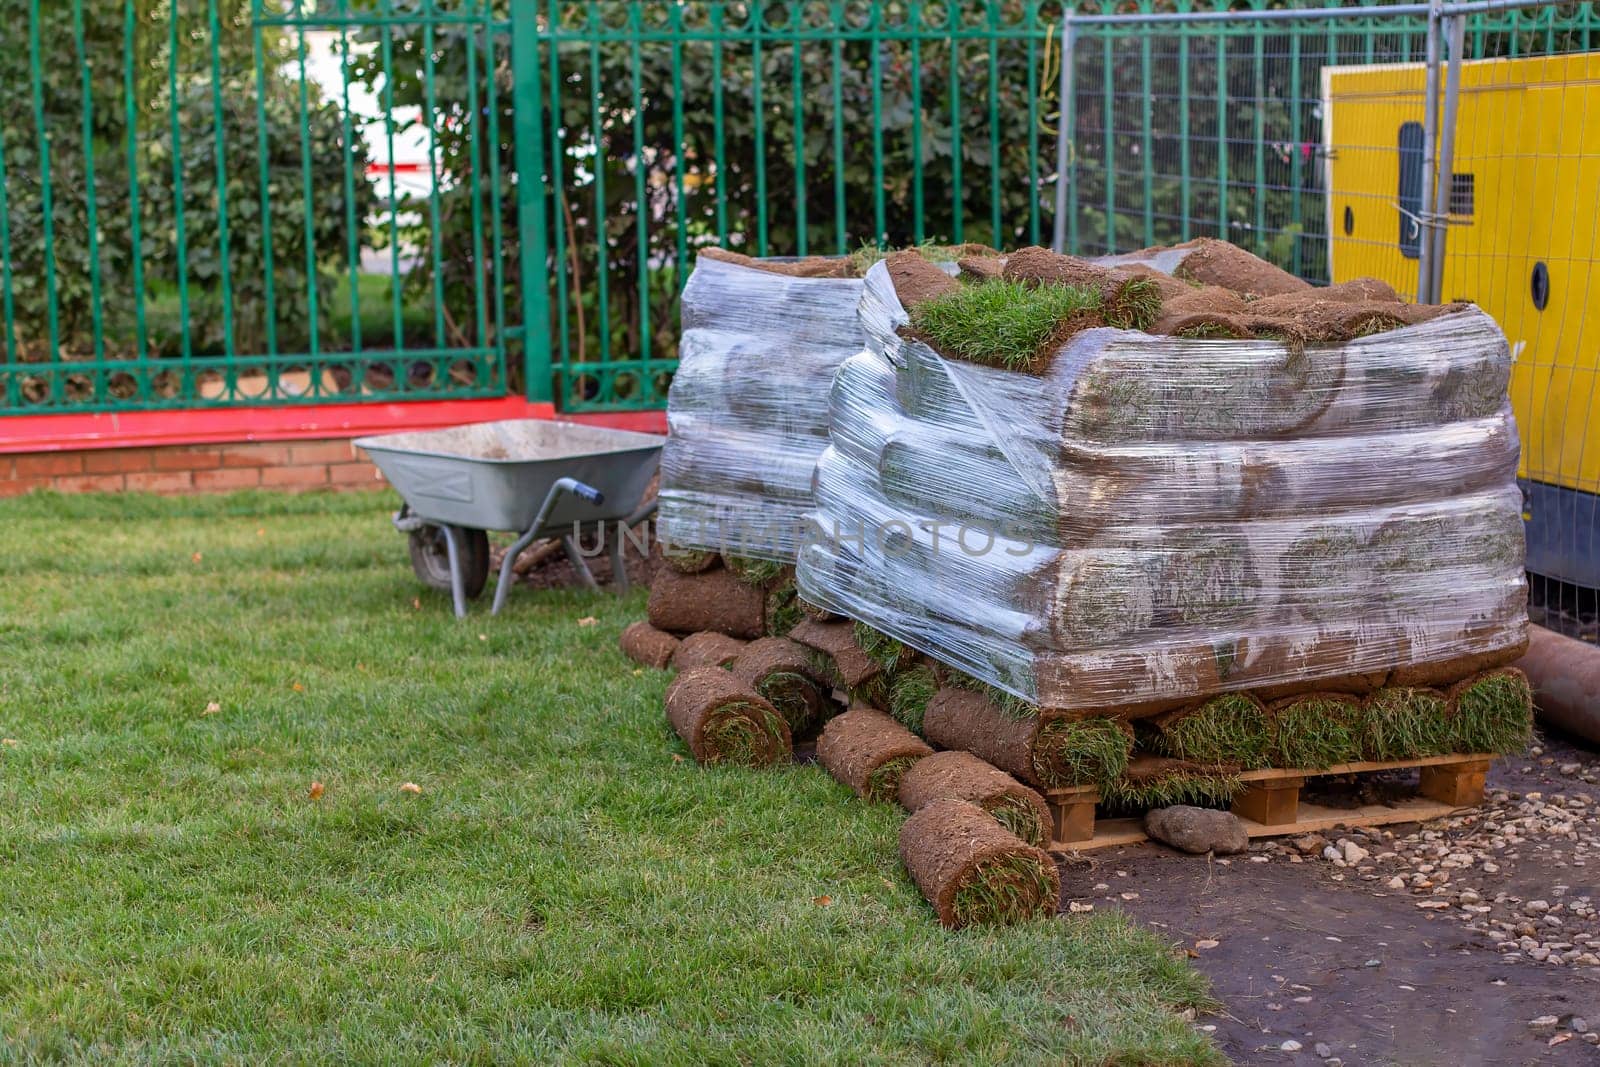 Fresh rolls of rolled lawn, prepared for laying the lawn in the landscaping area, with a wheelbarrow and a yellow generator in the background by Zakharova